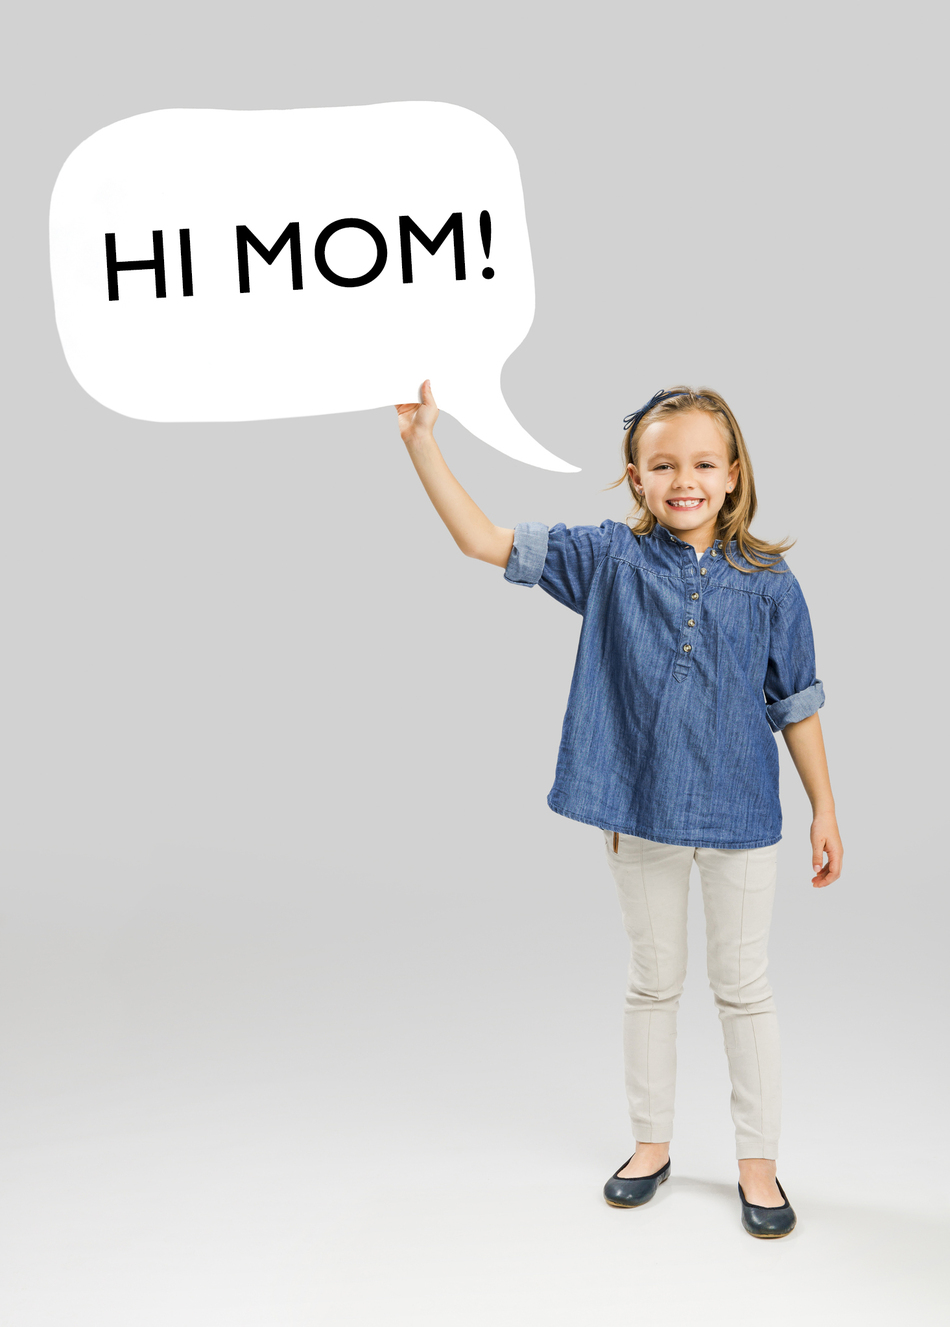 How to Identify Stuttering in Your Child